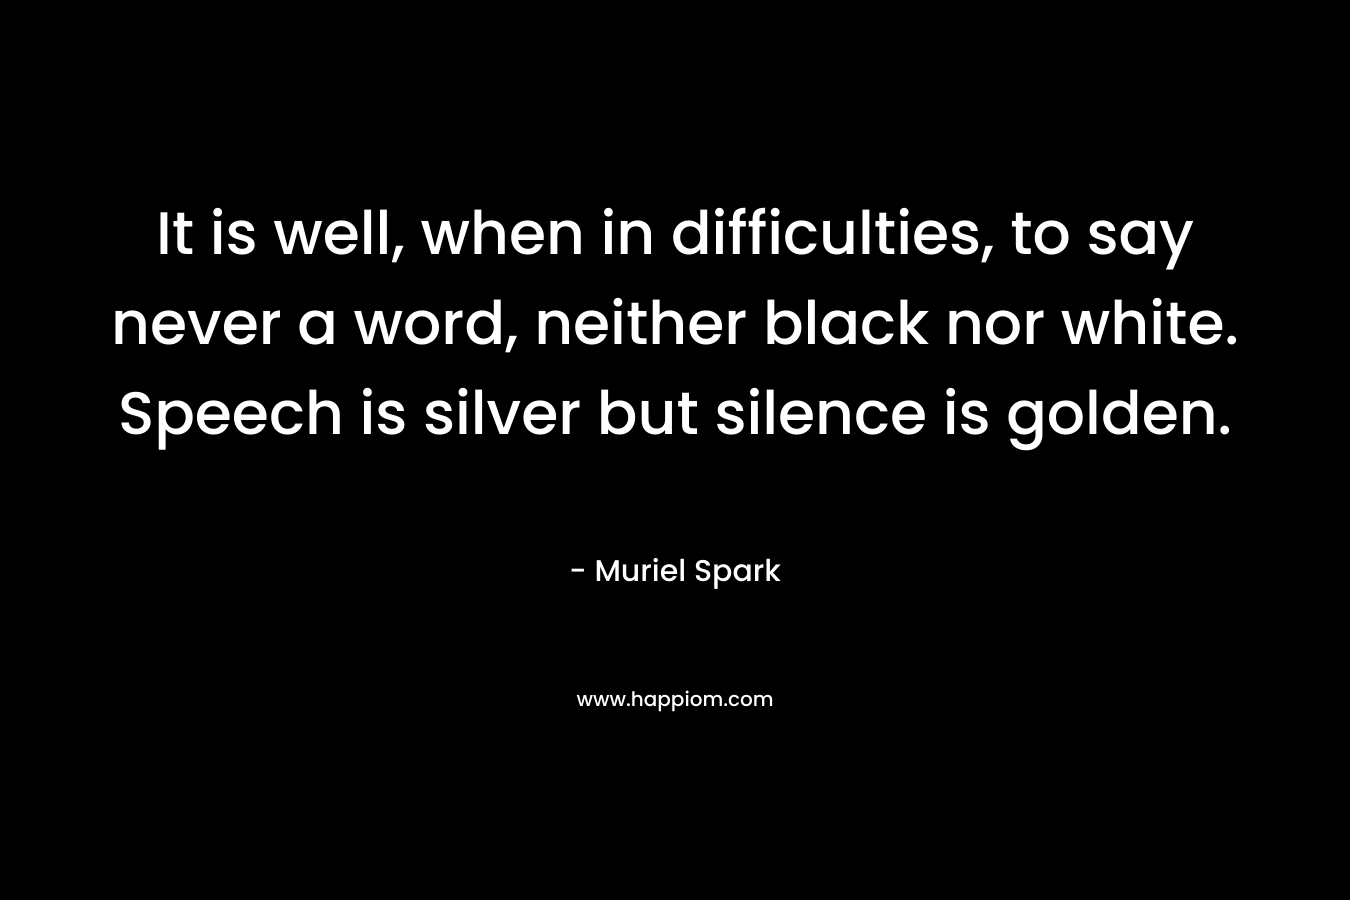 It is well, when in difficulties, to say never a word, neither black nor white. Speech is silver but silence is golden.